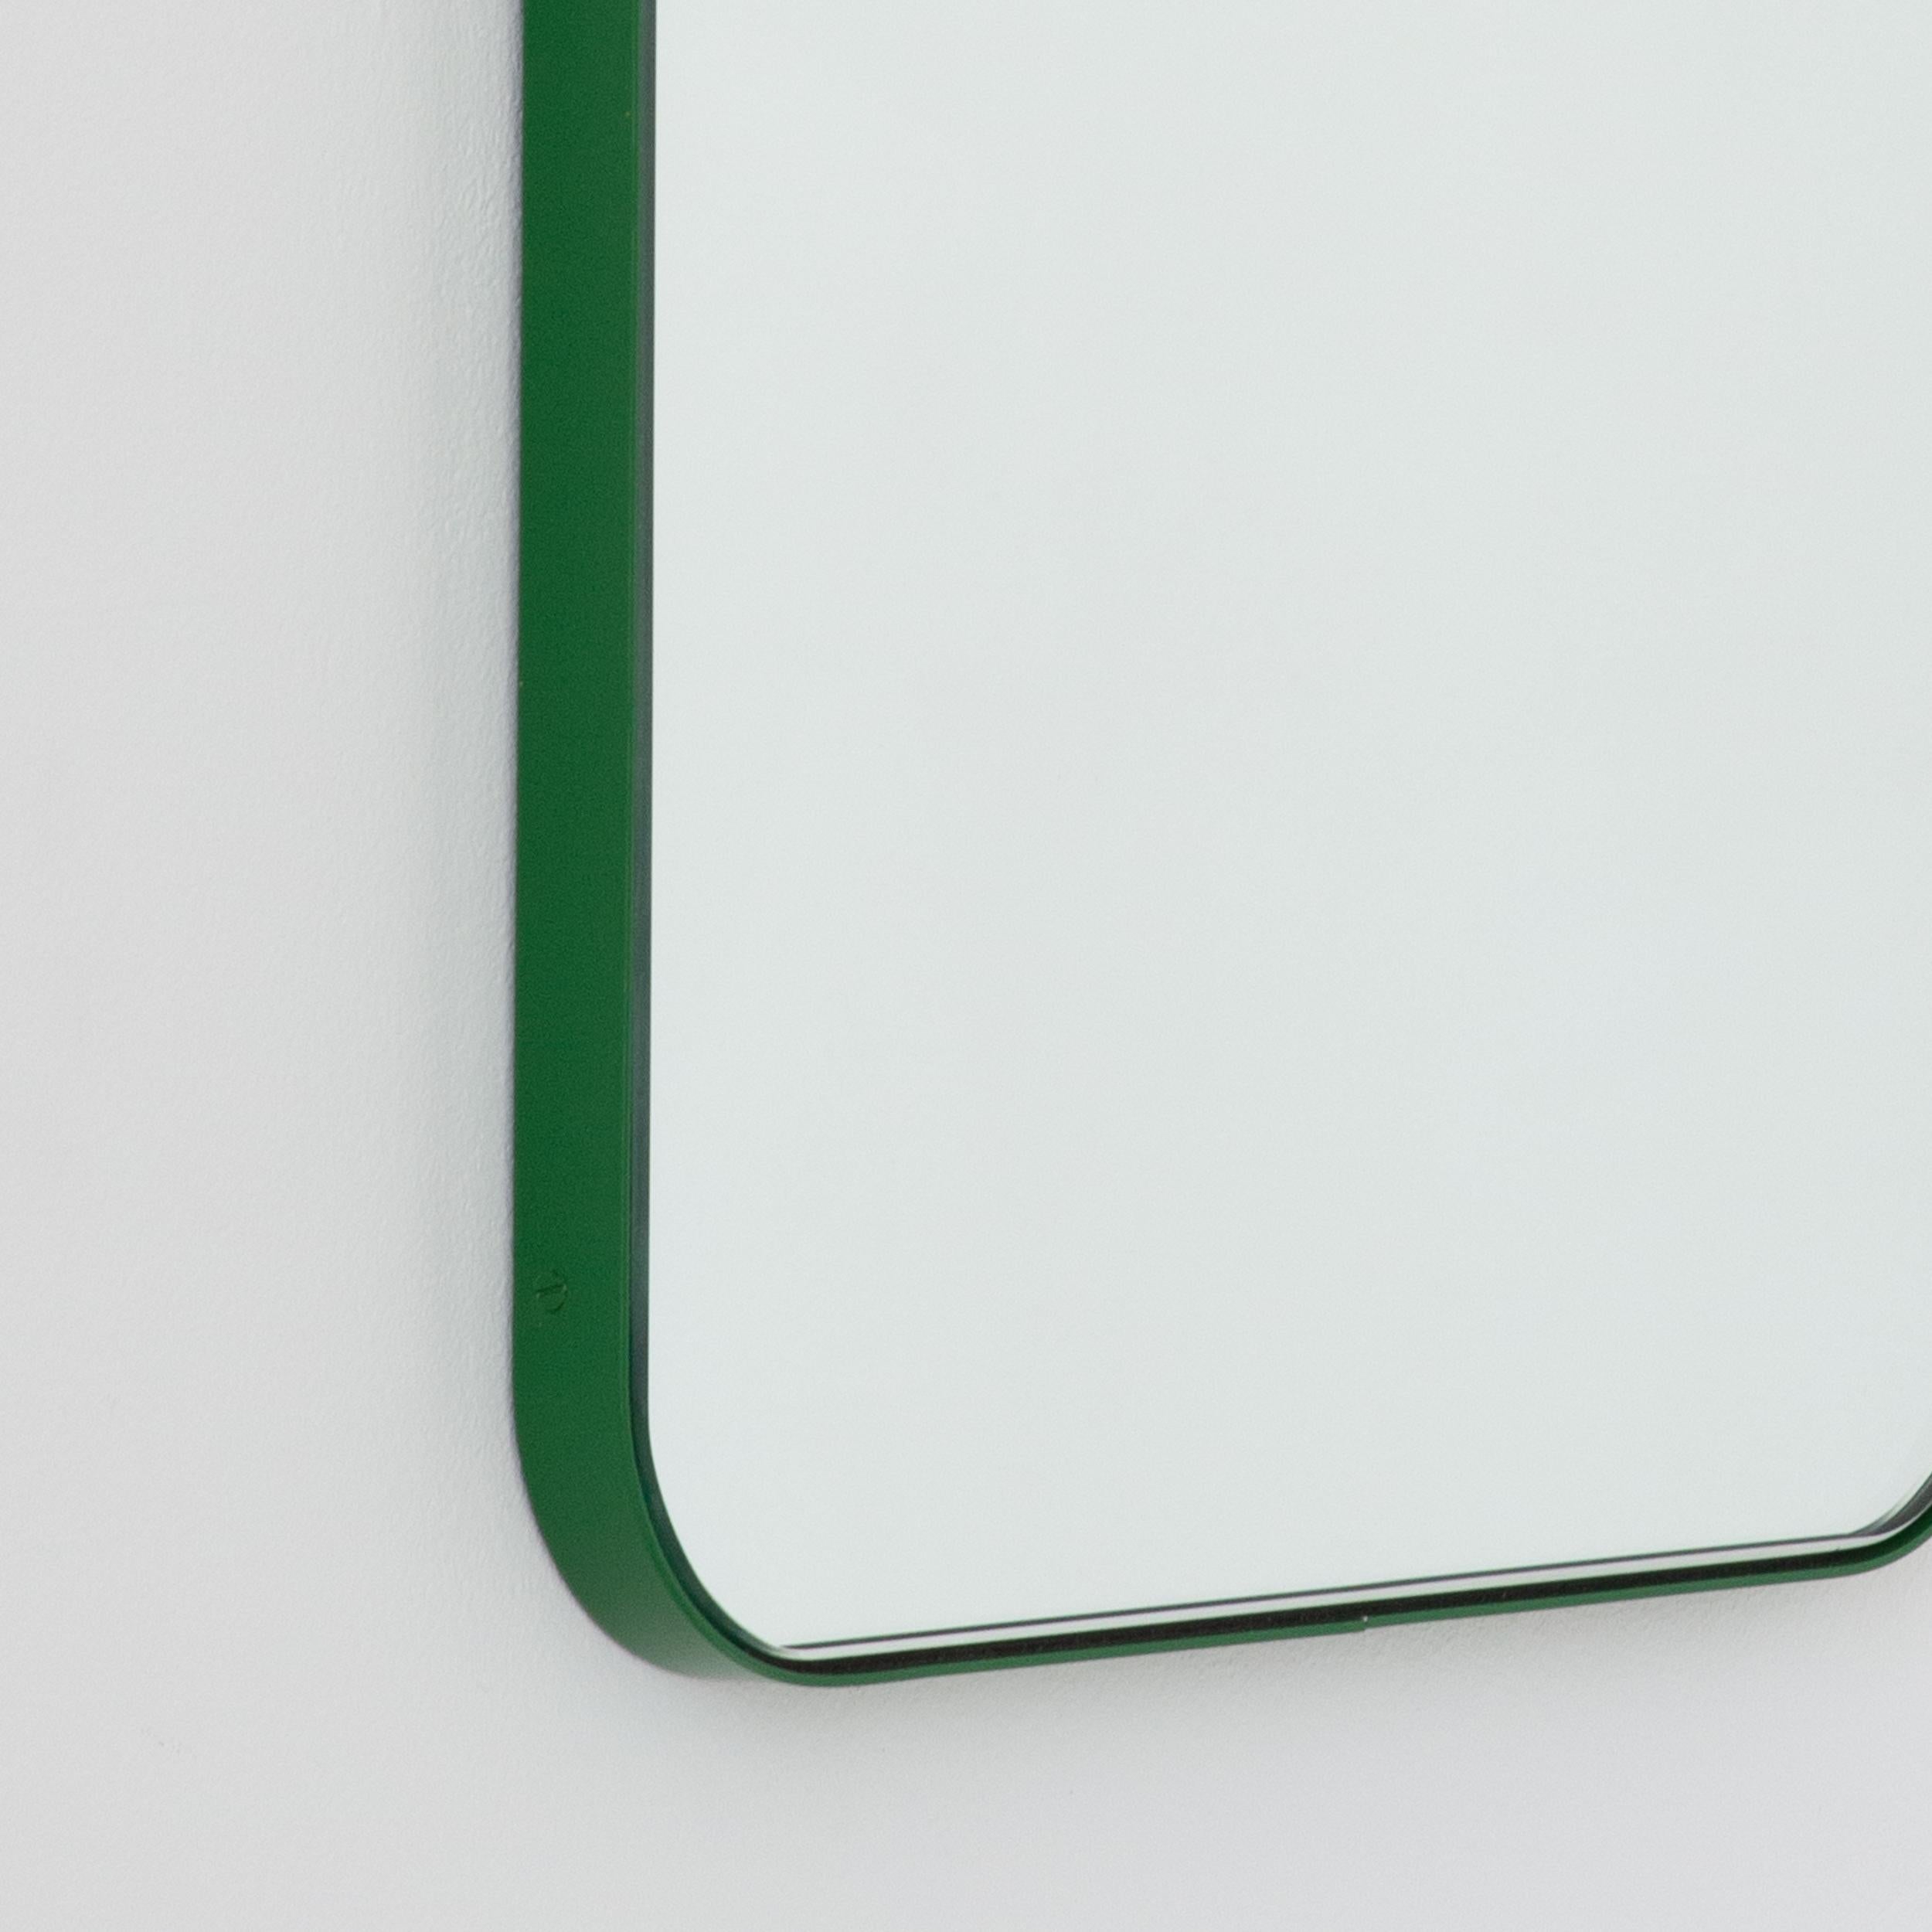 Quadris Rectangular Modern Wall Mirror with a Green Frame, XL In New Condition For Sale In London, GB